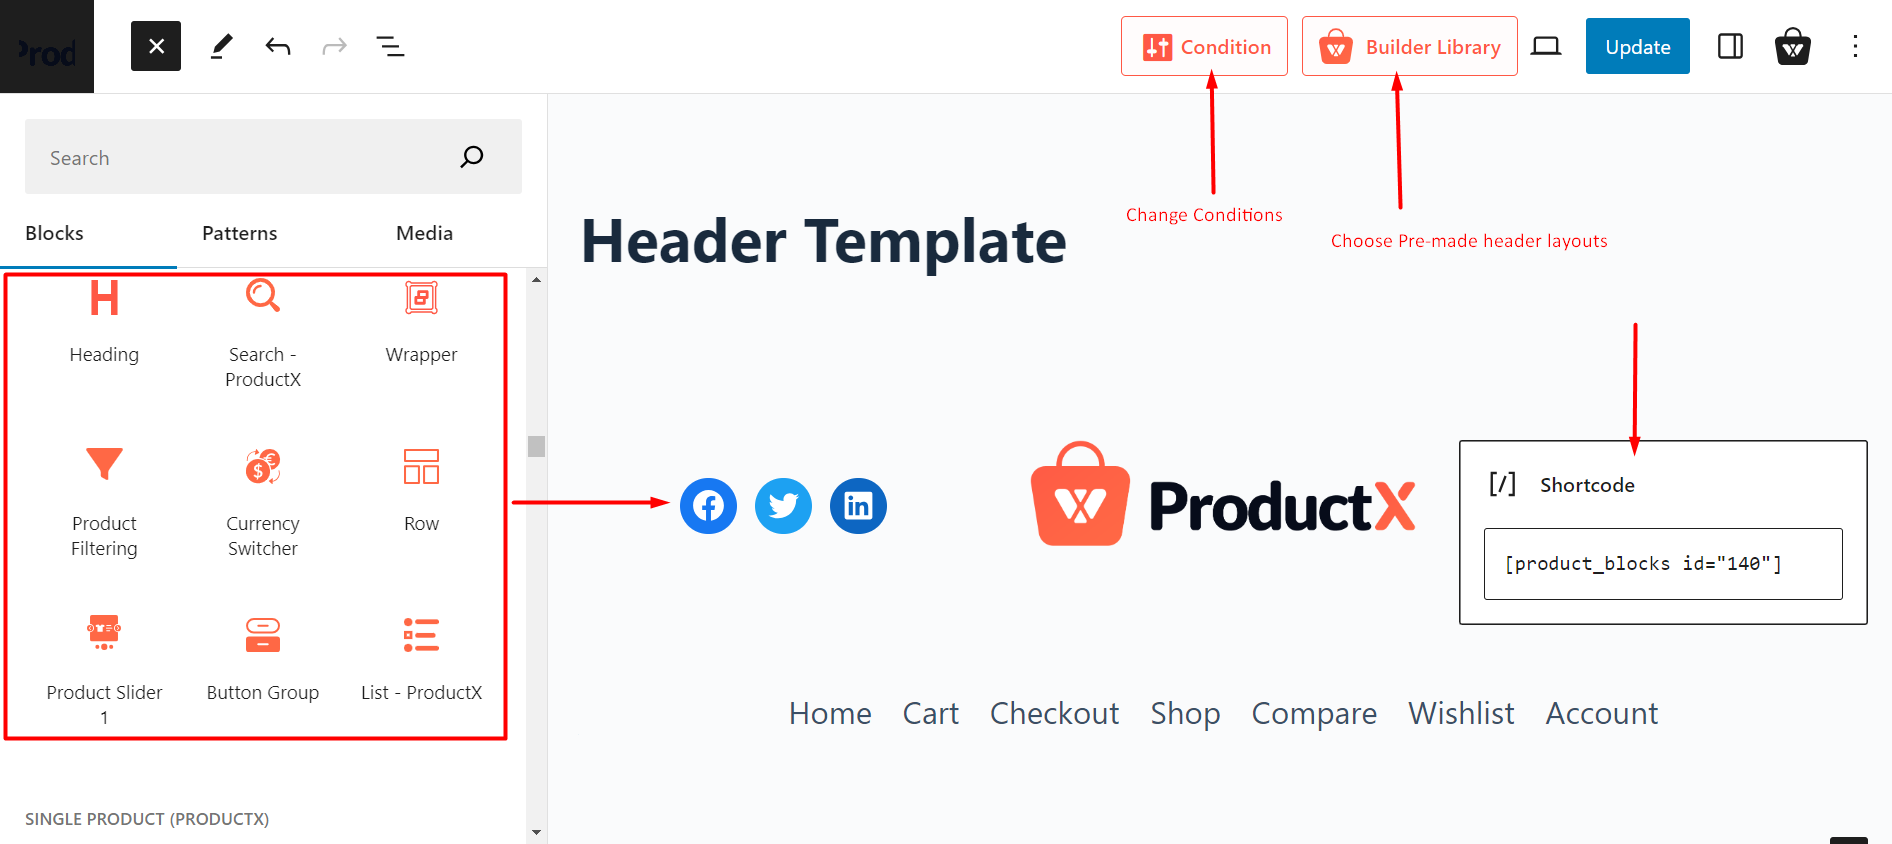 Create and Edit Header Template using the Header editor in the Builder